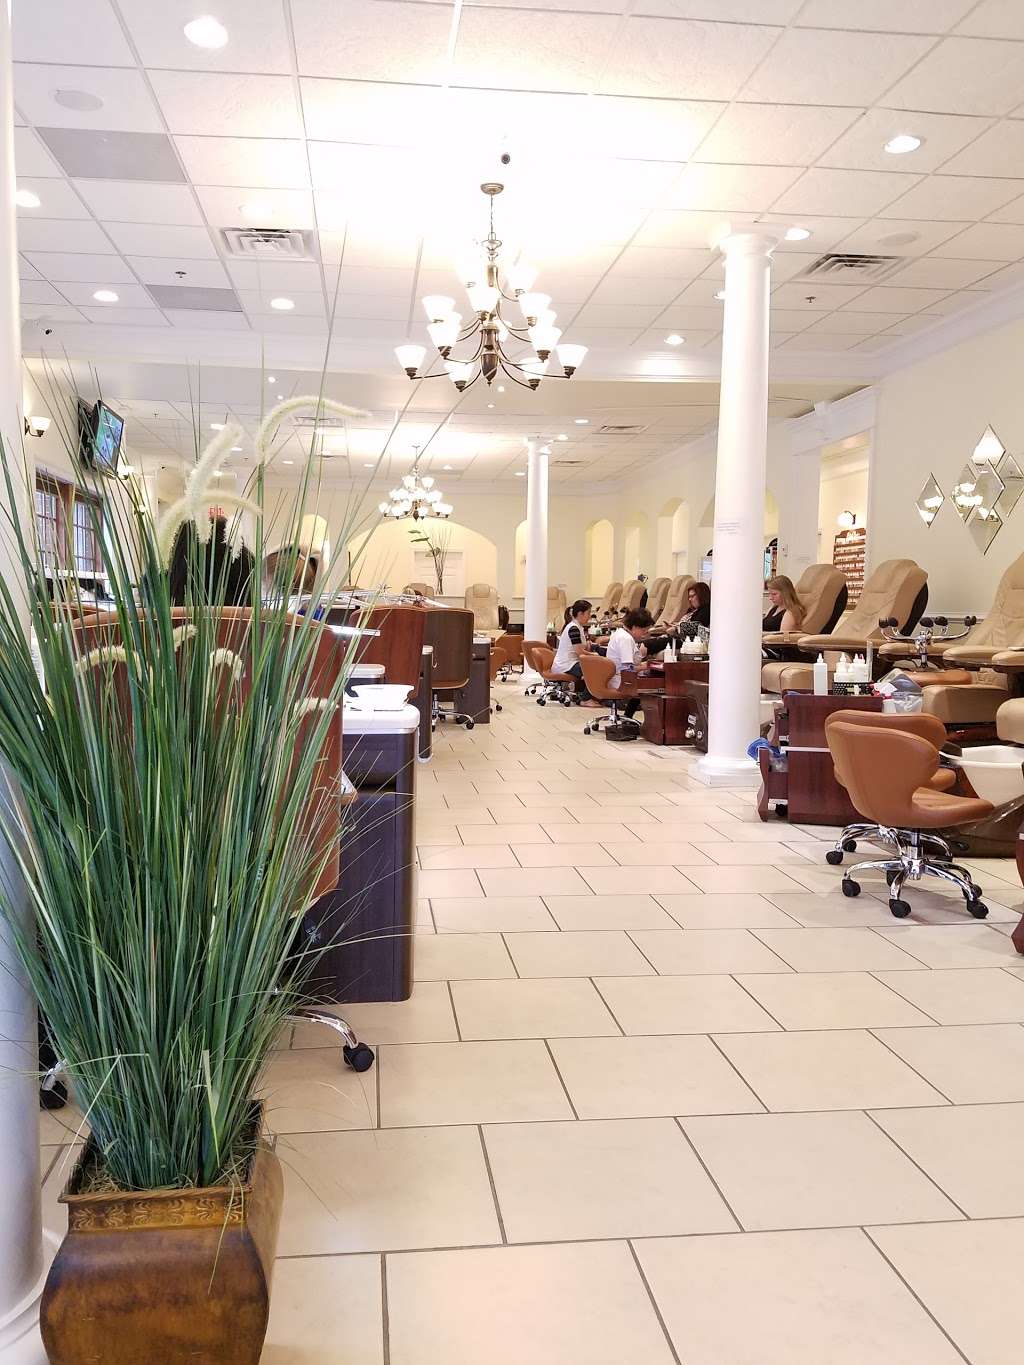 Nail & Hair Care Spa | 5705 Richards Valley Rd, Ellicott City, MD 21043 | Phone: (410) 465-7464